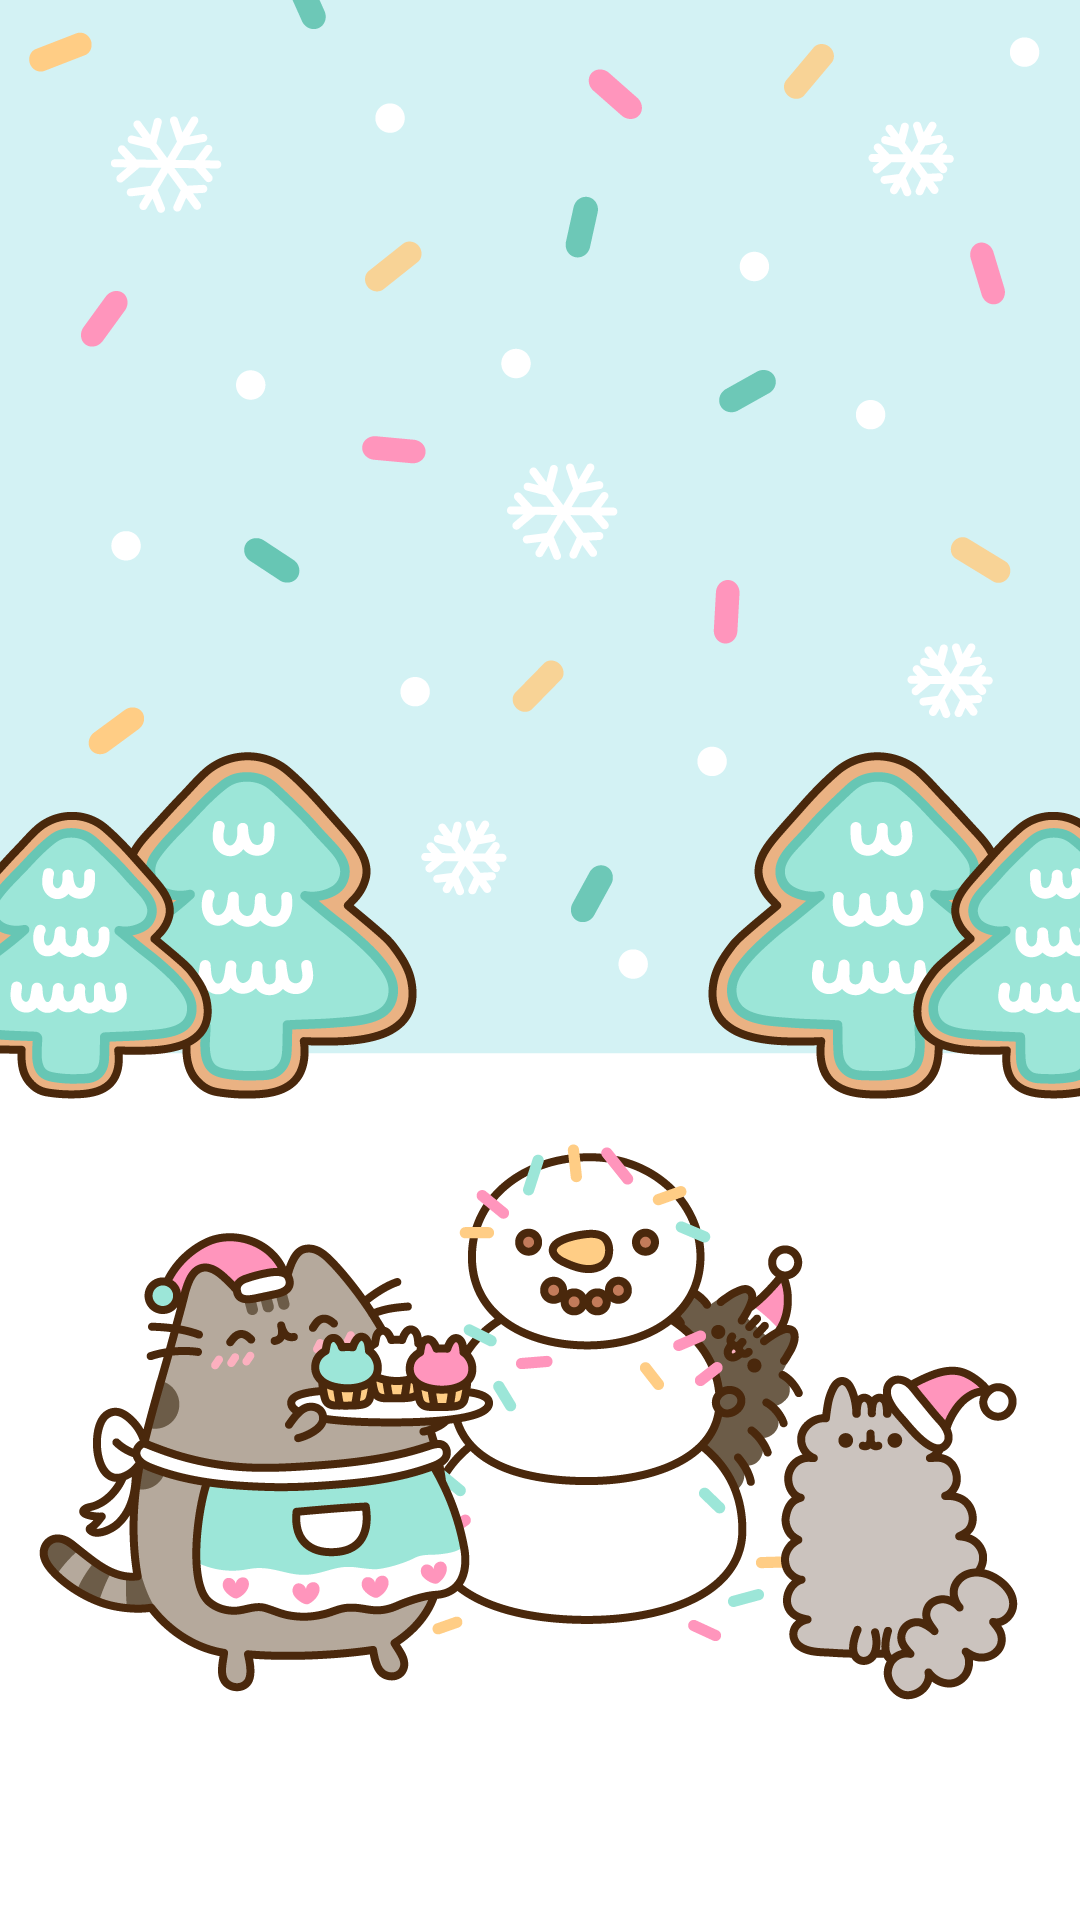 iFace on Twitter Pusheen brings smiles and laughter to people all around  the world We are so happy to celebrate Pusheen on her special day  HappyBirthdayPusheen httpstcoeNRxVjI4jB httpstcoqnJvB8lFbj   Twitter